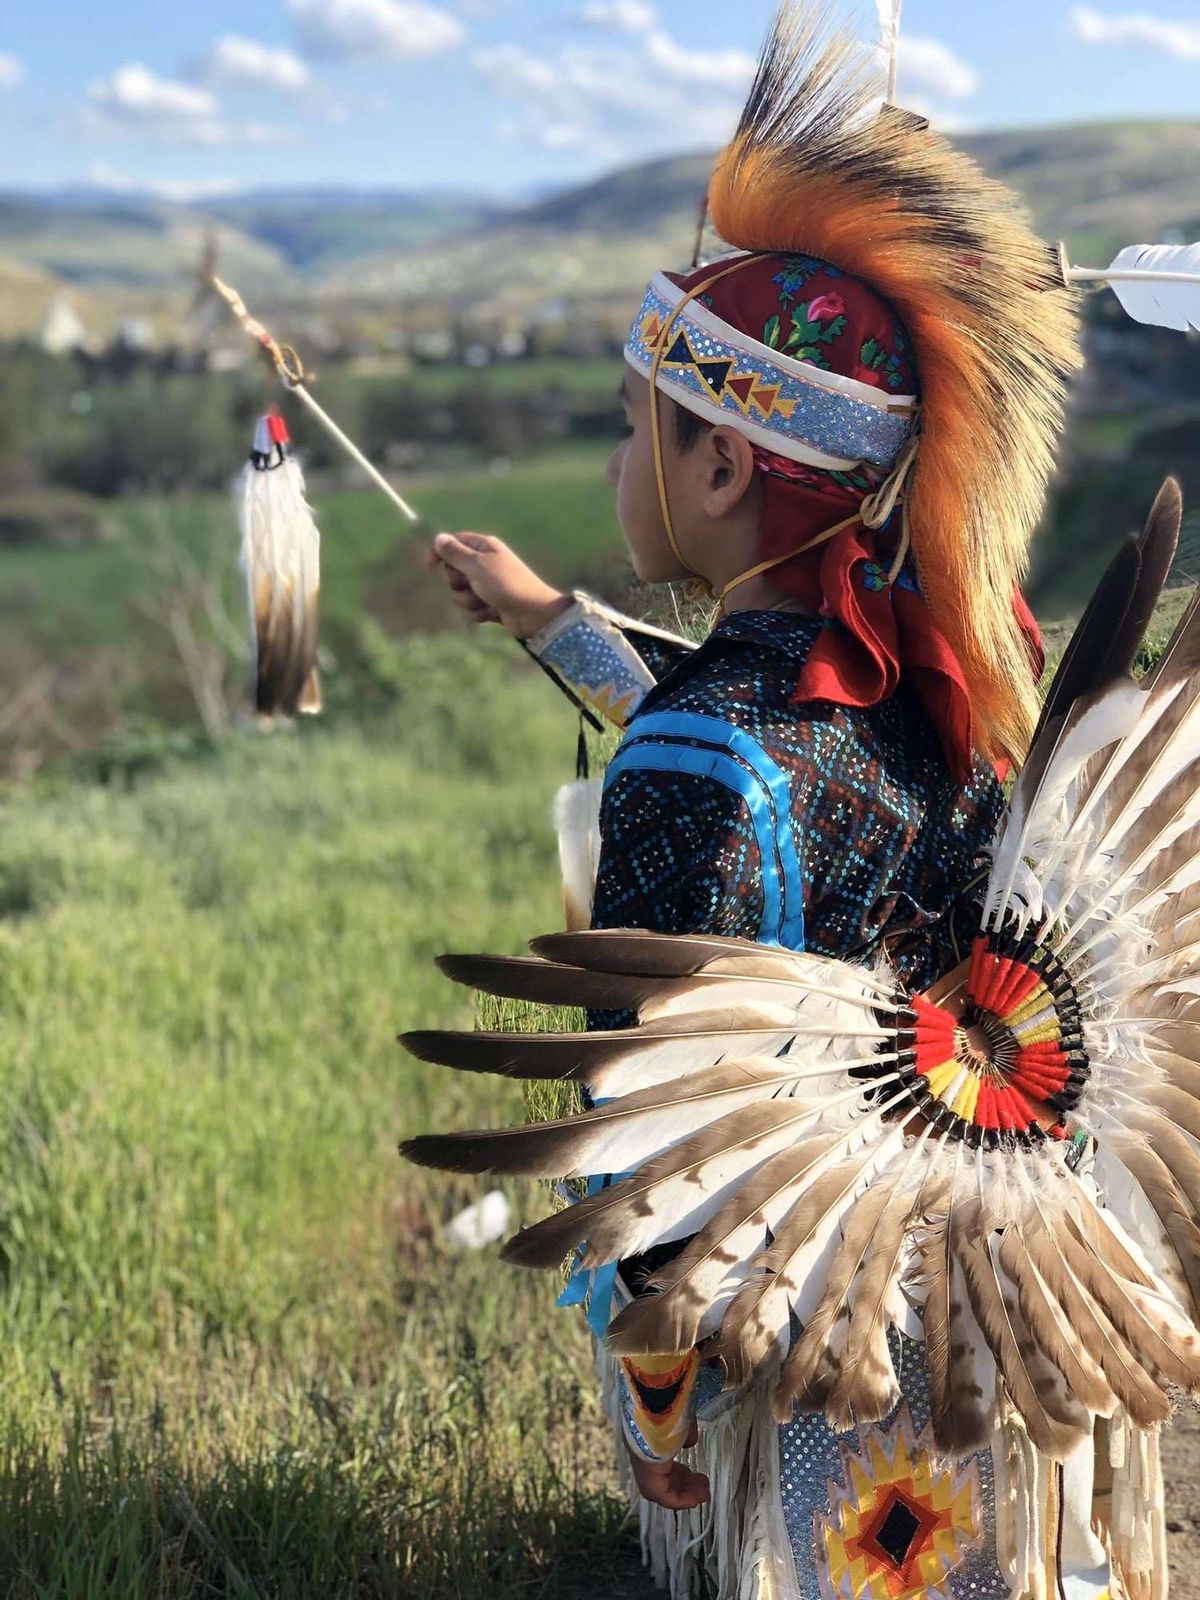 Hashkai Robert Bird’s Prairie Chicken regalia was handmade by his mother. At age four he wanted to dance in multiple categories, but making regalia takes time and money, his mother Shibabe Abrahamson said. He’s now committed to the Prairie Chicken Dance. (Eric Bird / Eric Bird)